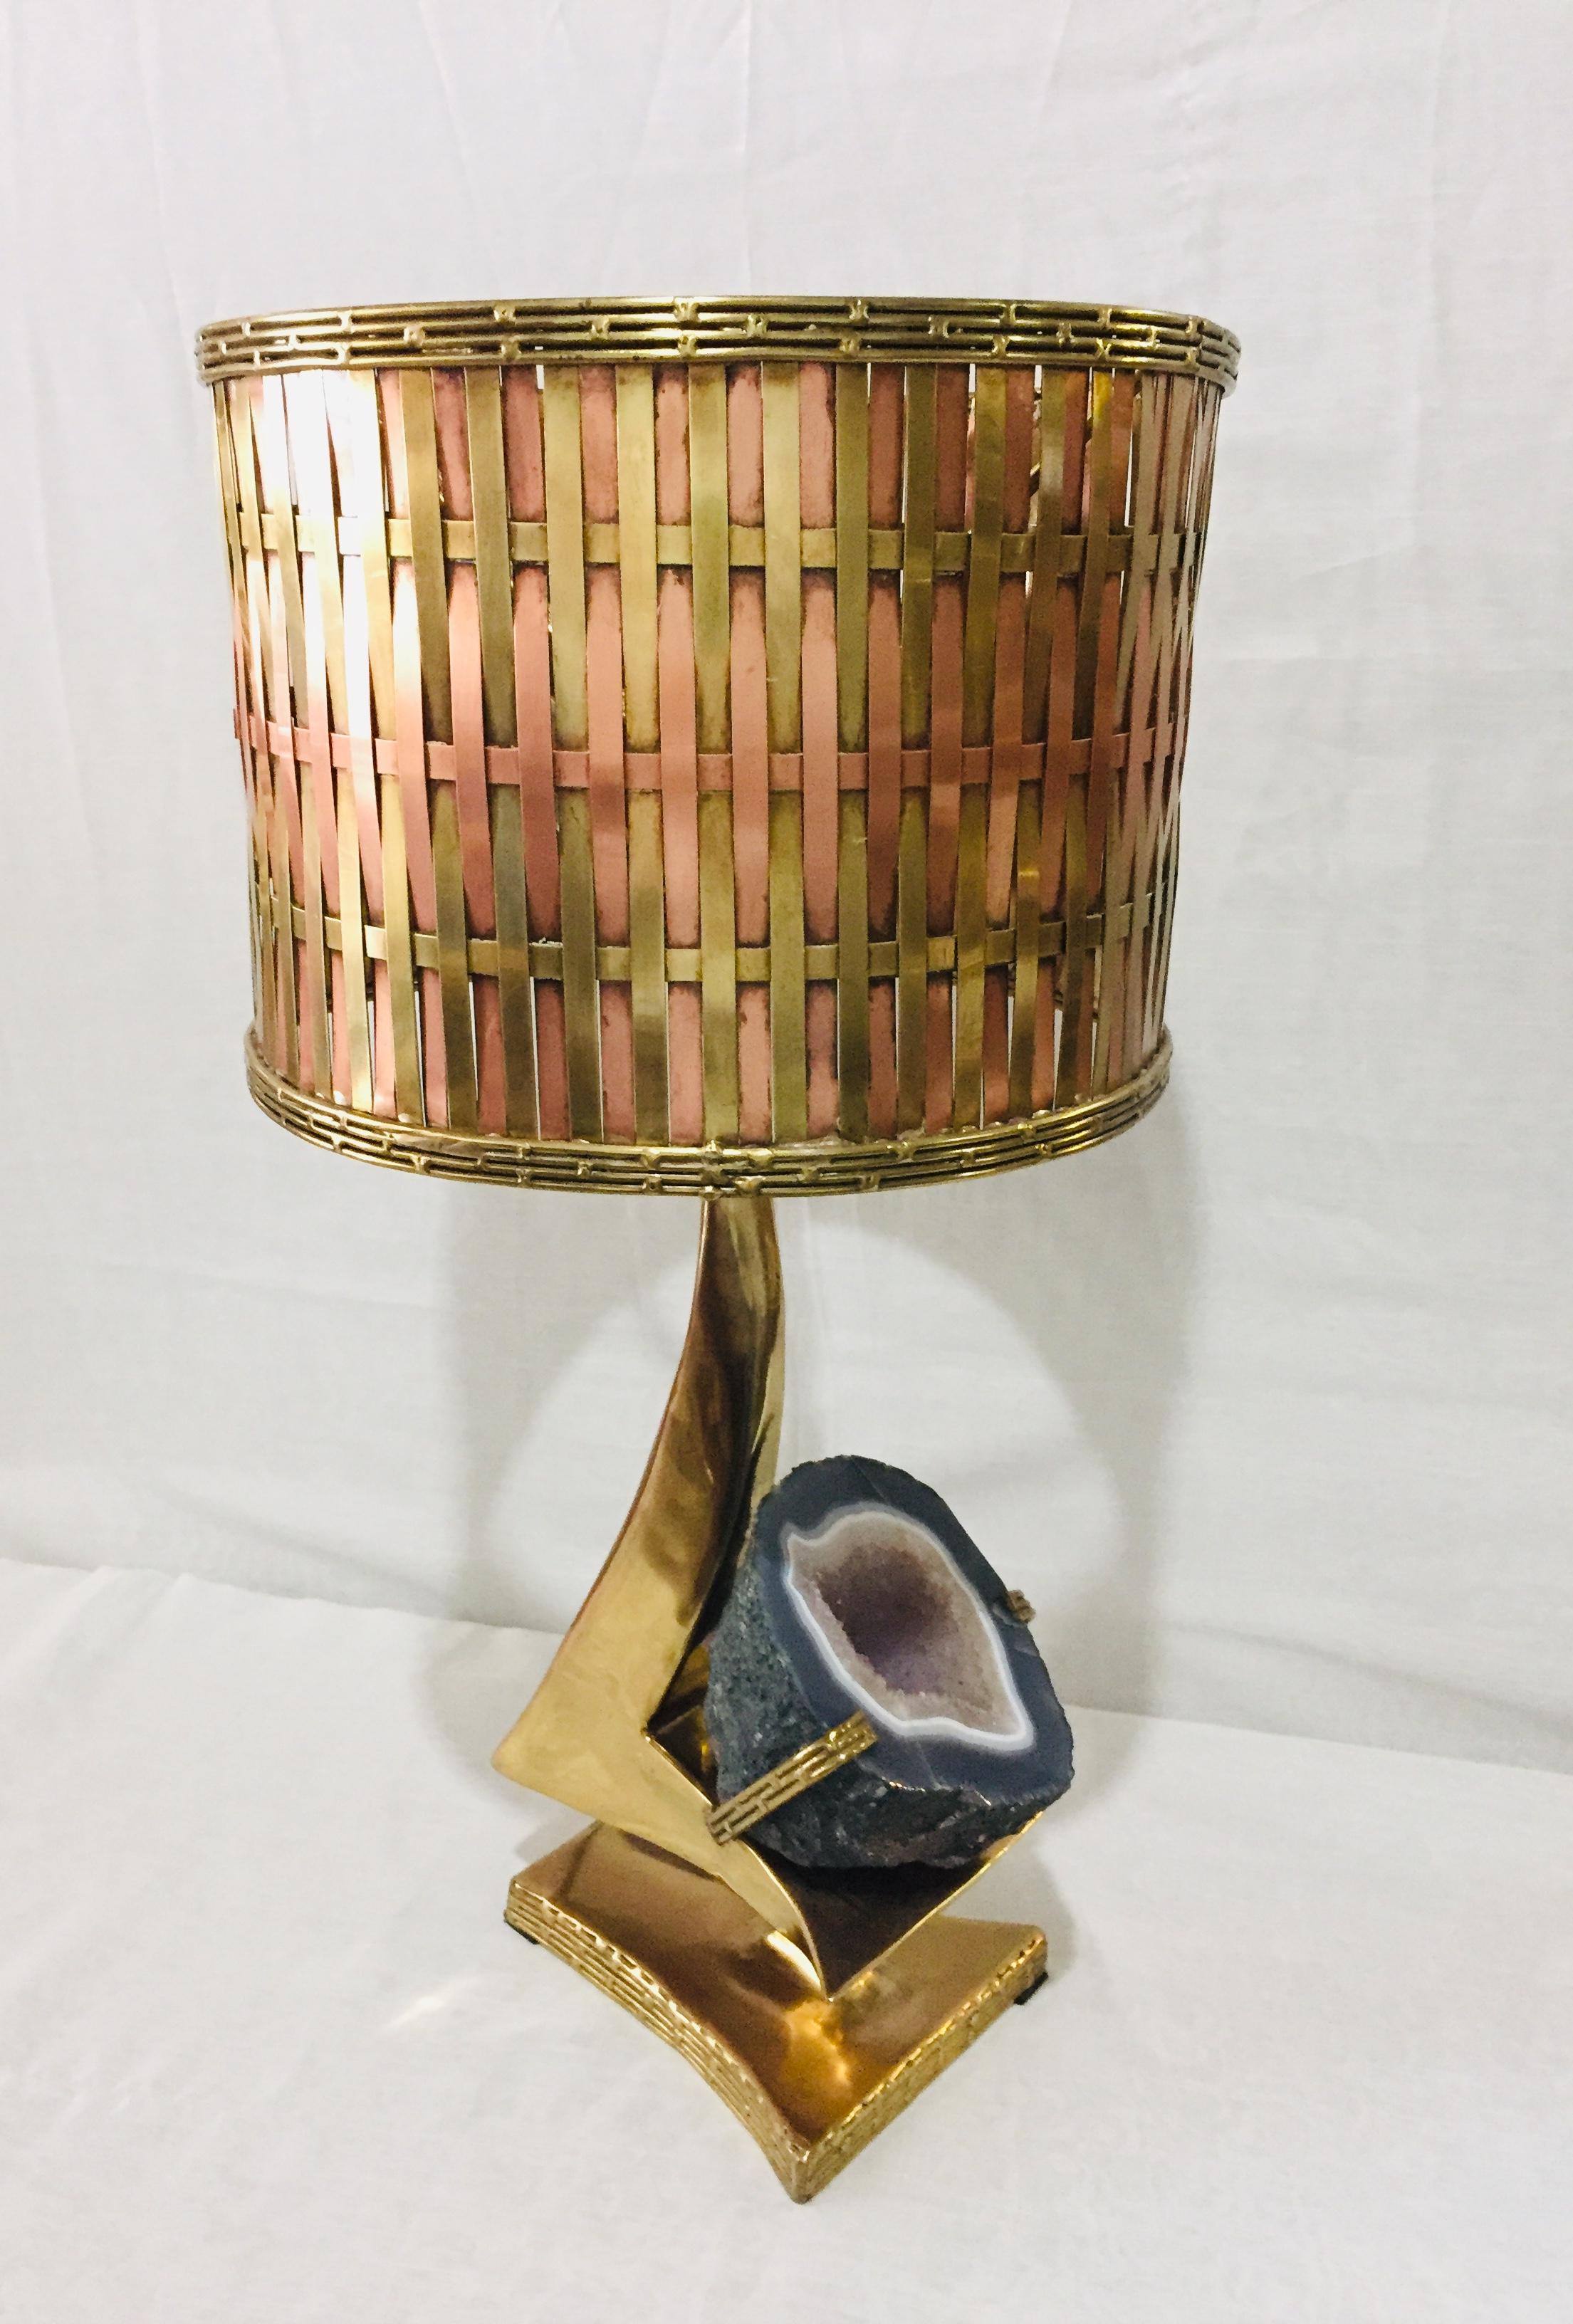 Sculpture table lamp in gilt brass and rose quartz l Geode, sculptor Jacques Duval Brasseur ( 1934 )
The lampshade is part of the sculpture as well in gilt brass, however these two pieces go a part .
Wired for US recently.